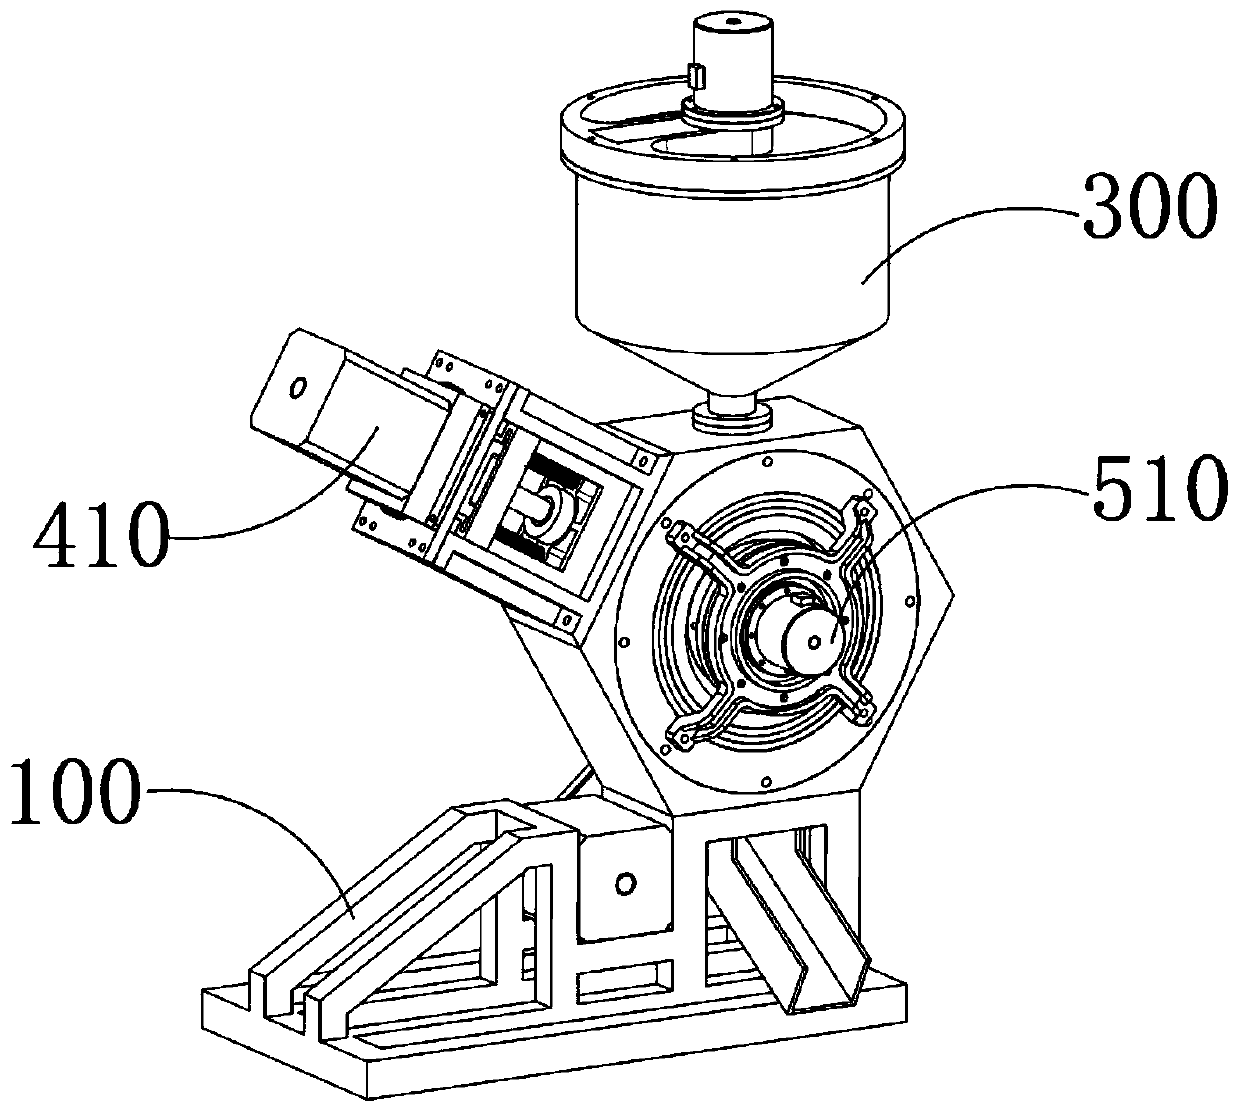 Multi-cylinder rotary oil pressing component for pressing rapeseeds to prepare rapeseed oil